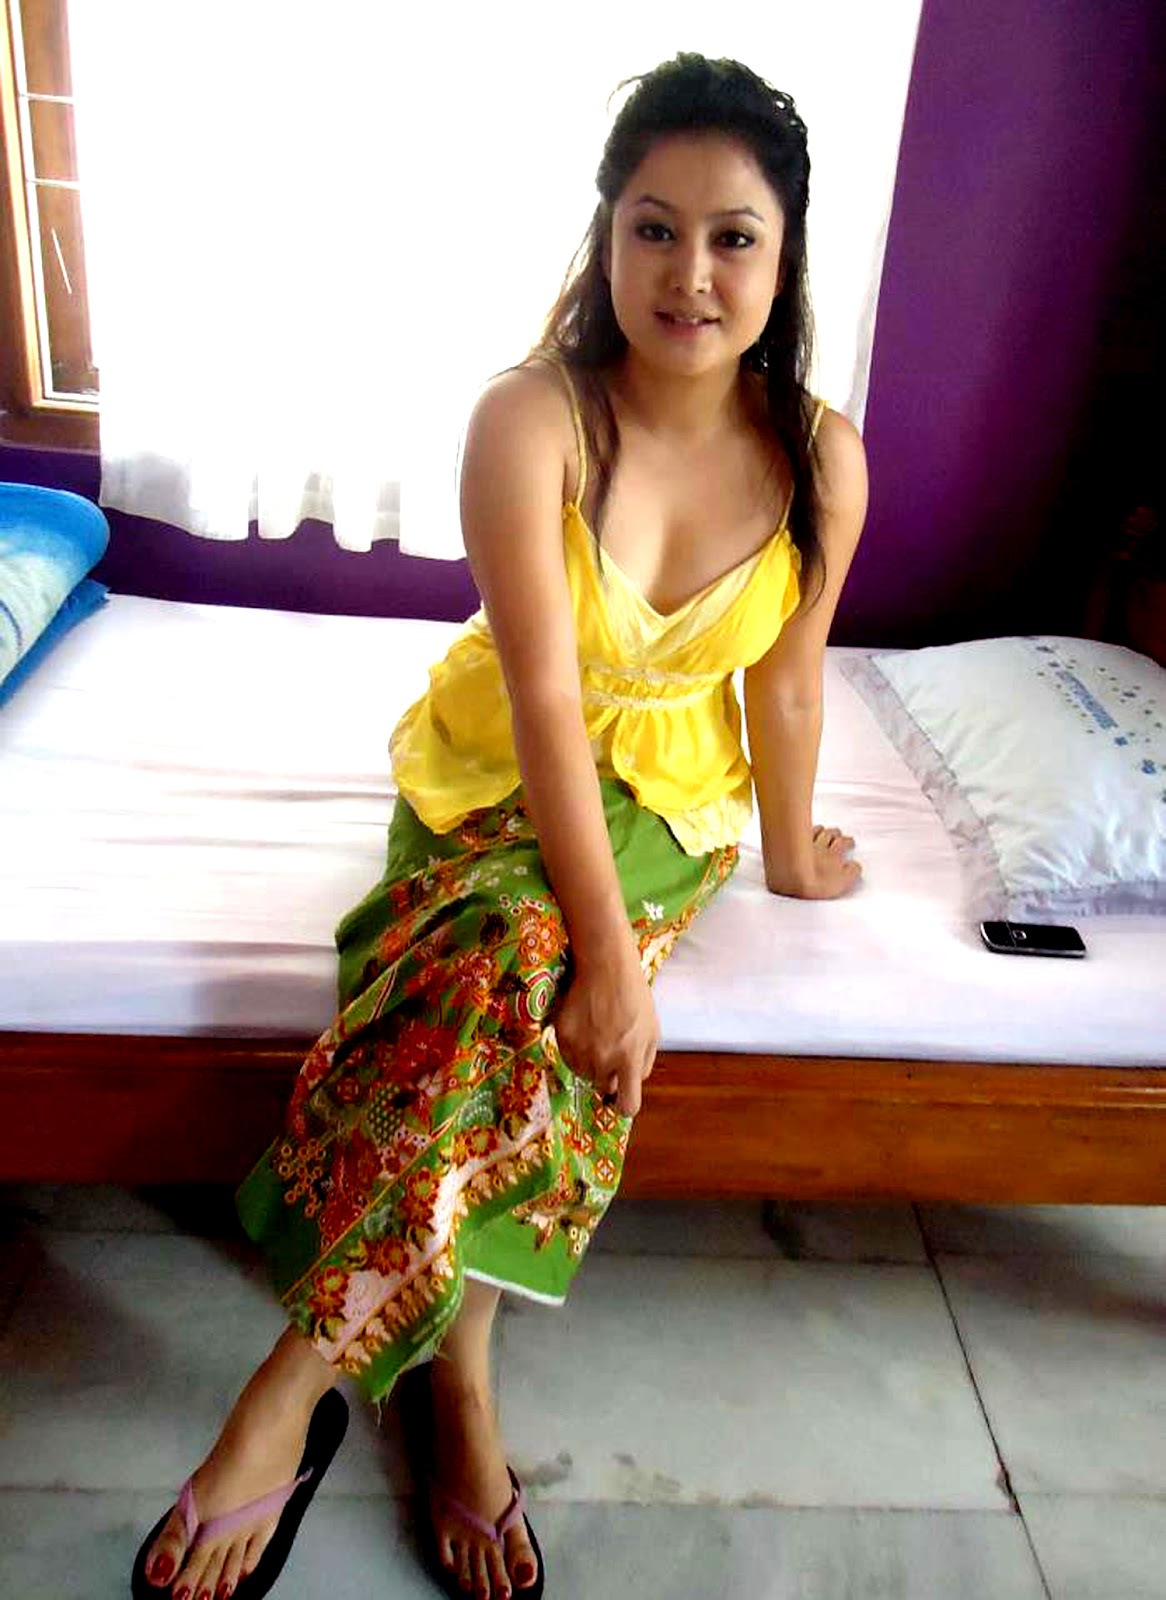 Manipur Sexy Video - Manipuri sexy girls nude photo - Porn Pics and Movies